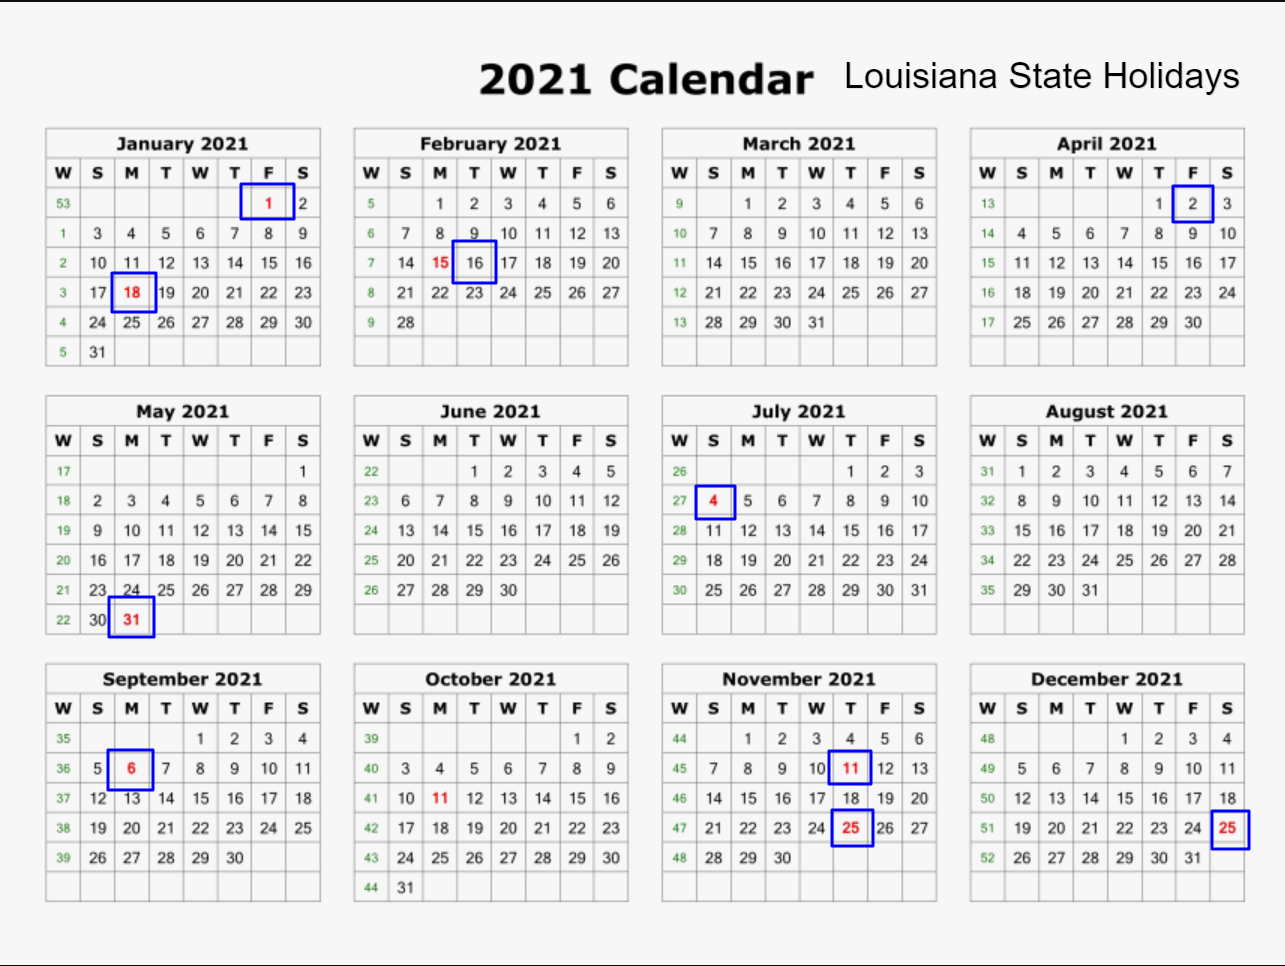 Louisiana State Holidays 2021 - List of Federal & State Holidays